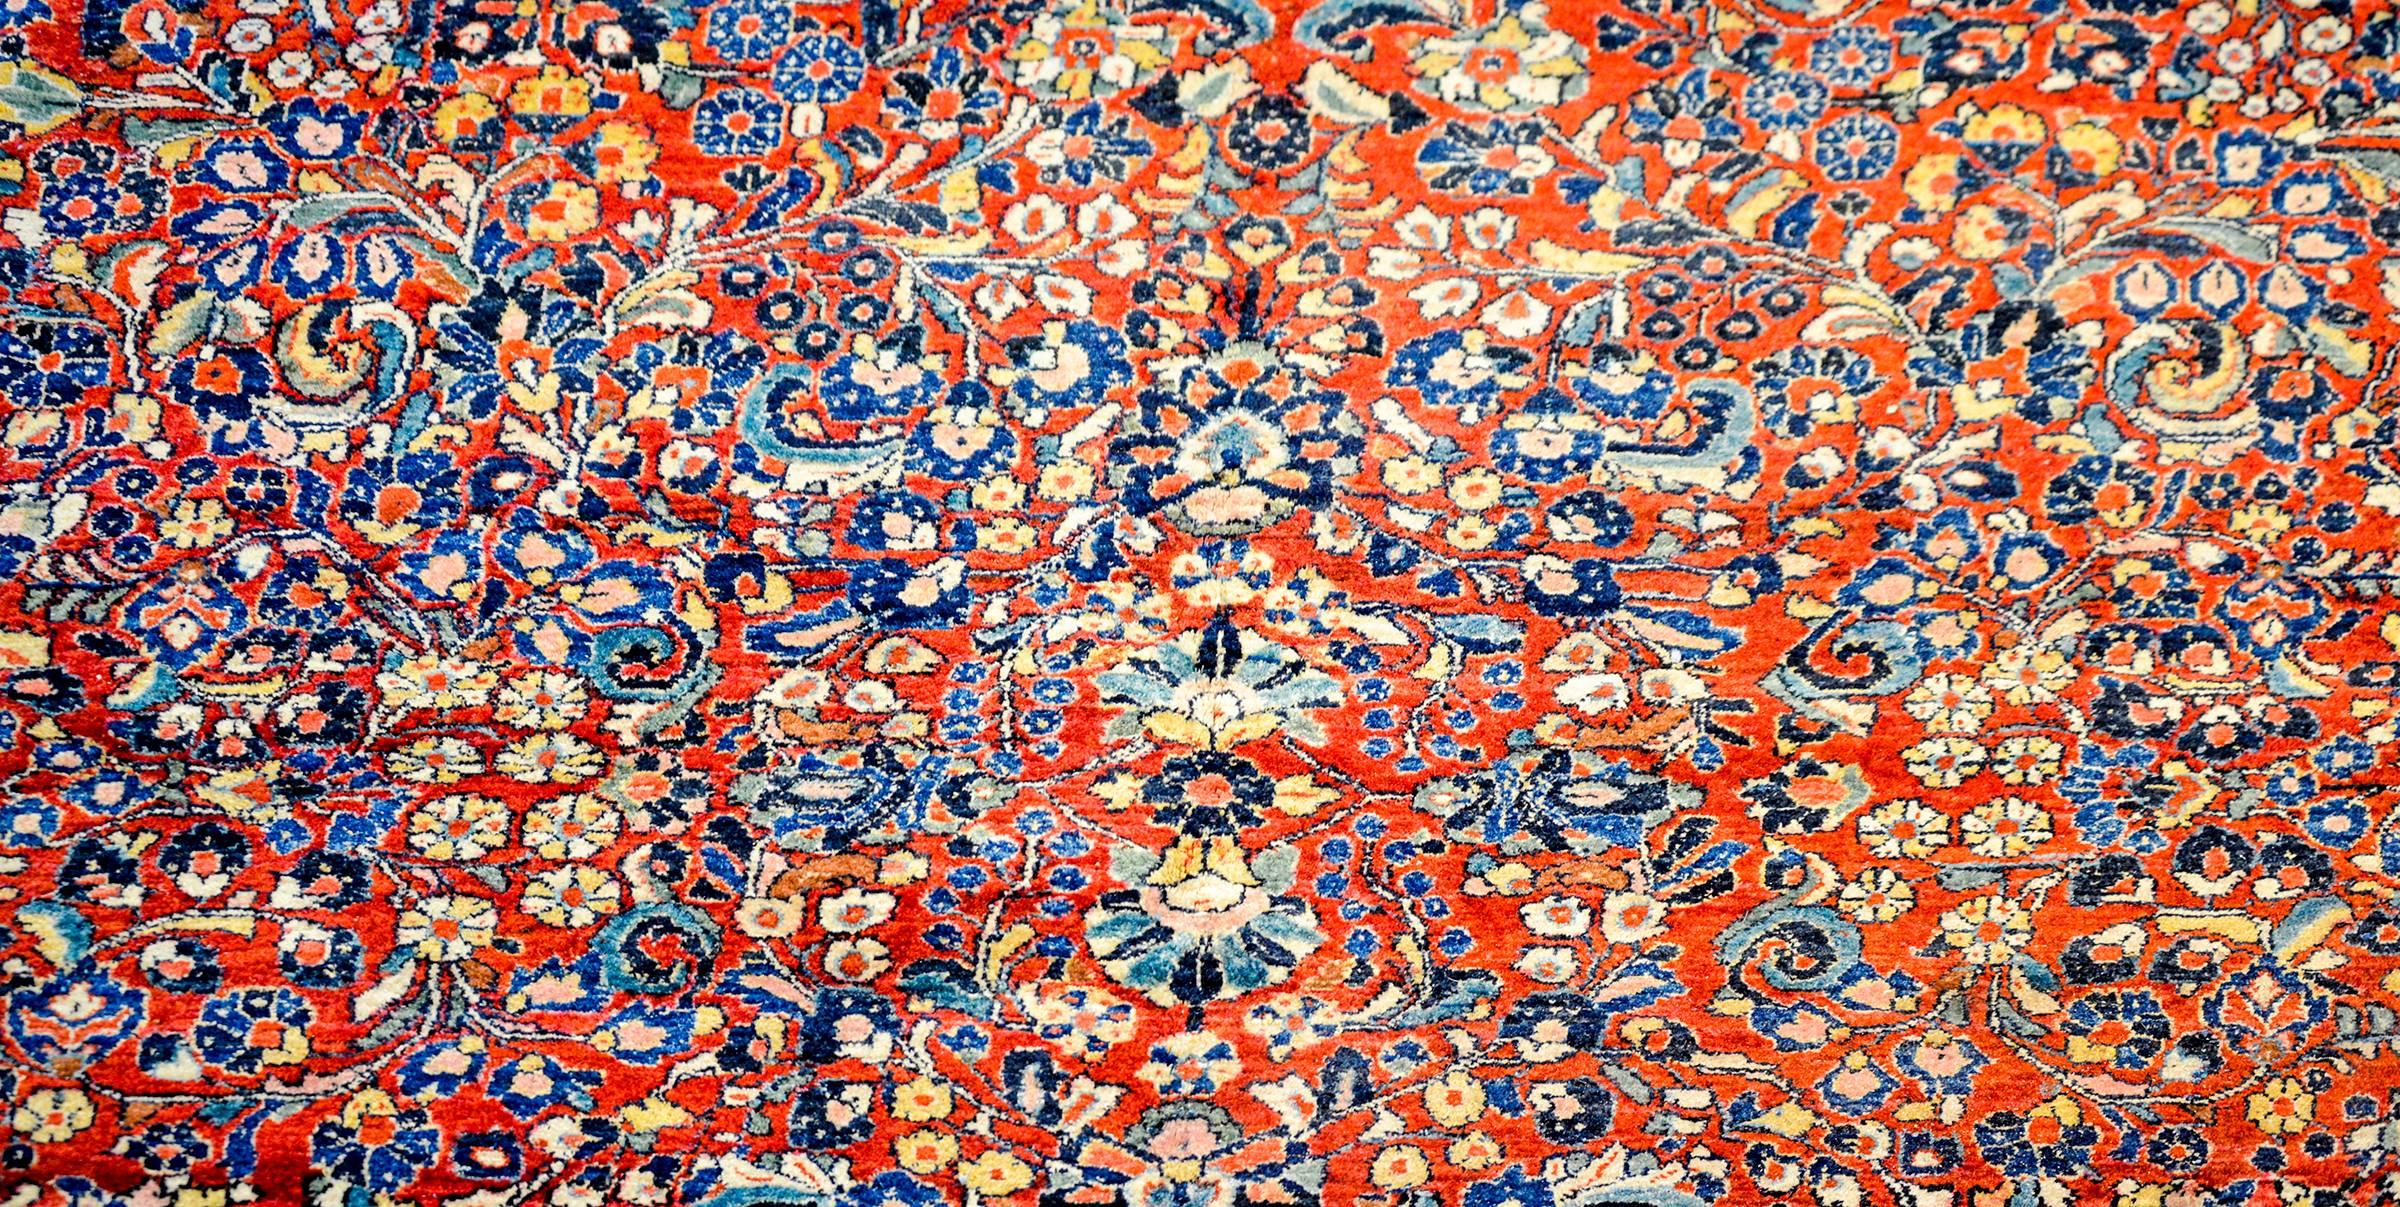 A wonderful early 20th century Persian Sarouk rug with a beautiful all-over mirror floral pattern woven in light and dark indigo, and natural wool, on an abrash cranberry background. The border is typical with a large-scale floral and vine pattern